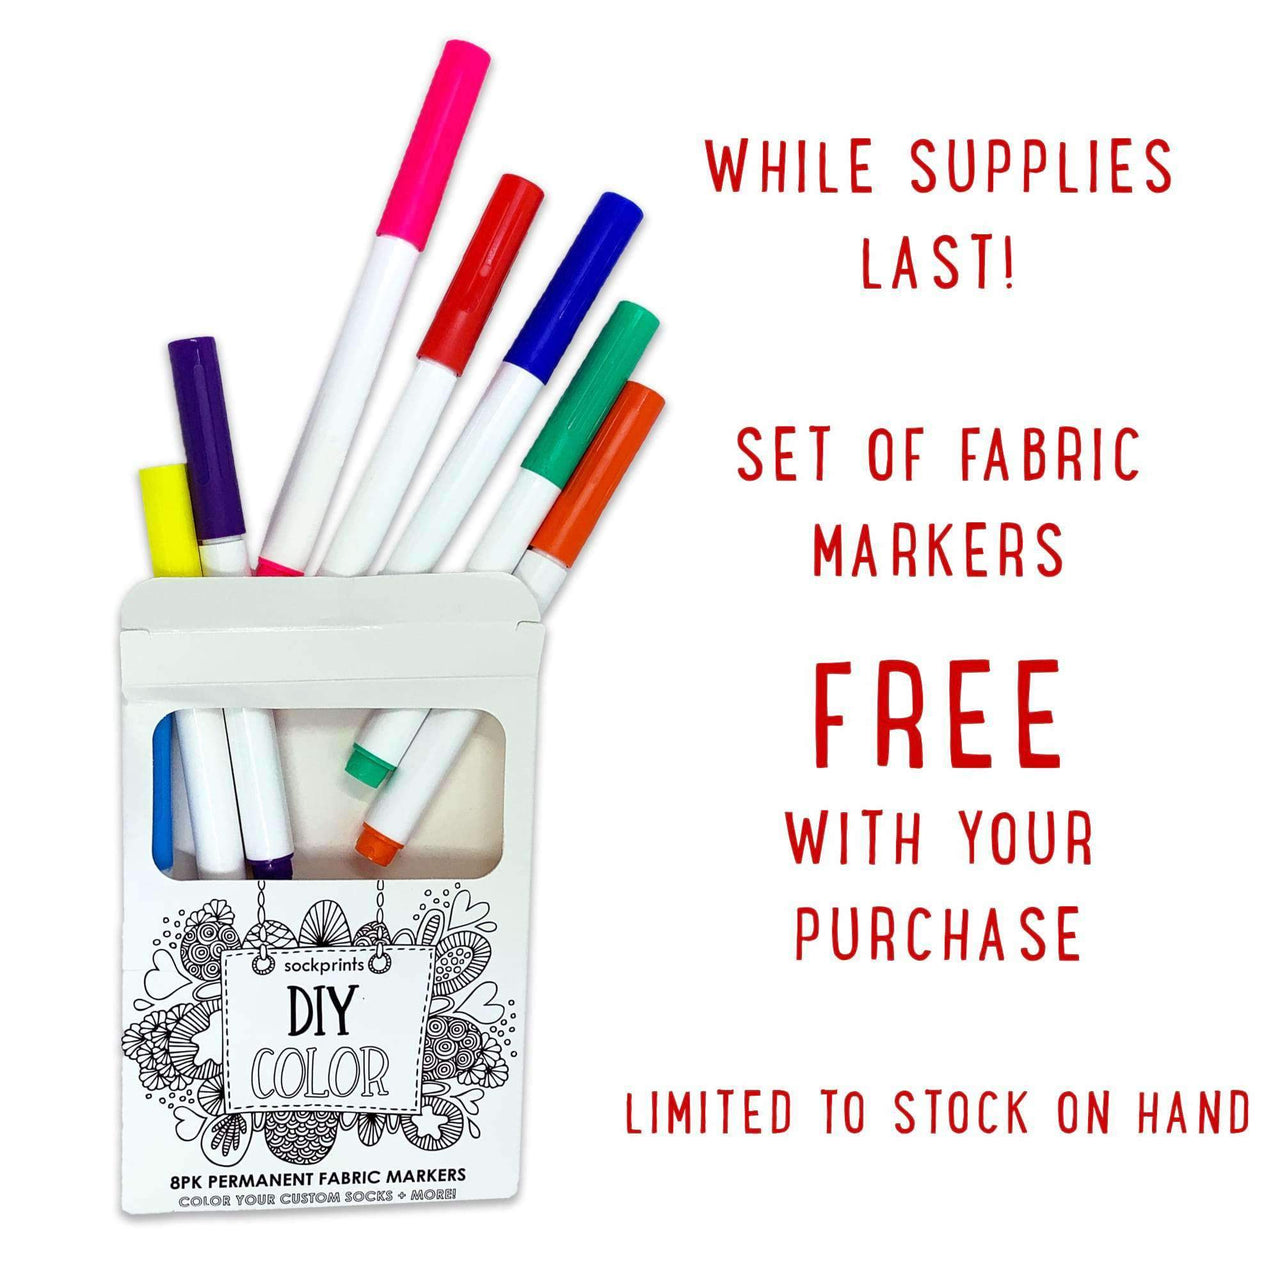 Fabric markers included with purchase of floral heart design on full print crew socks.